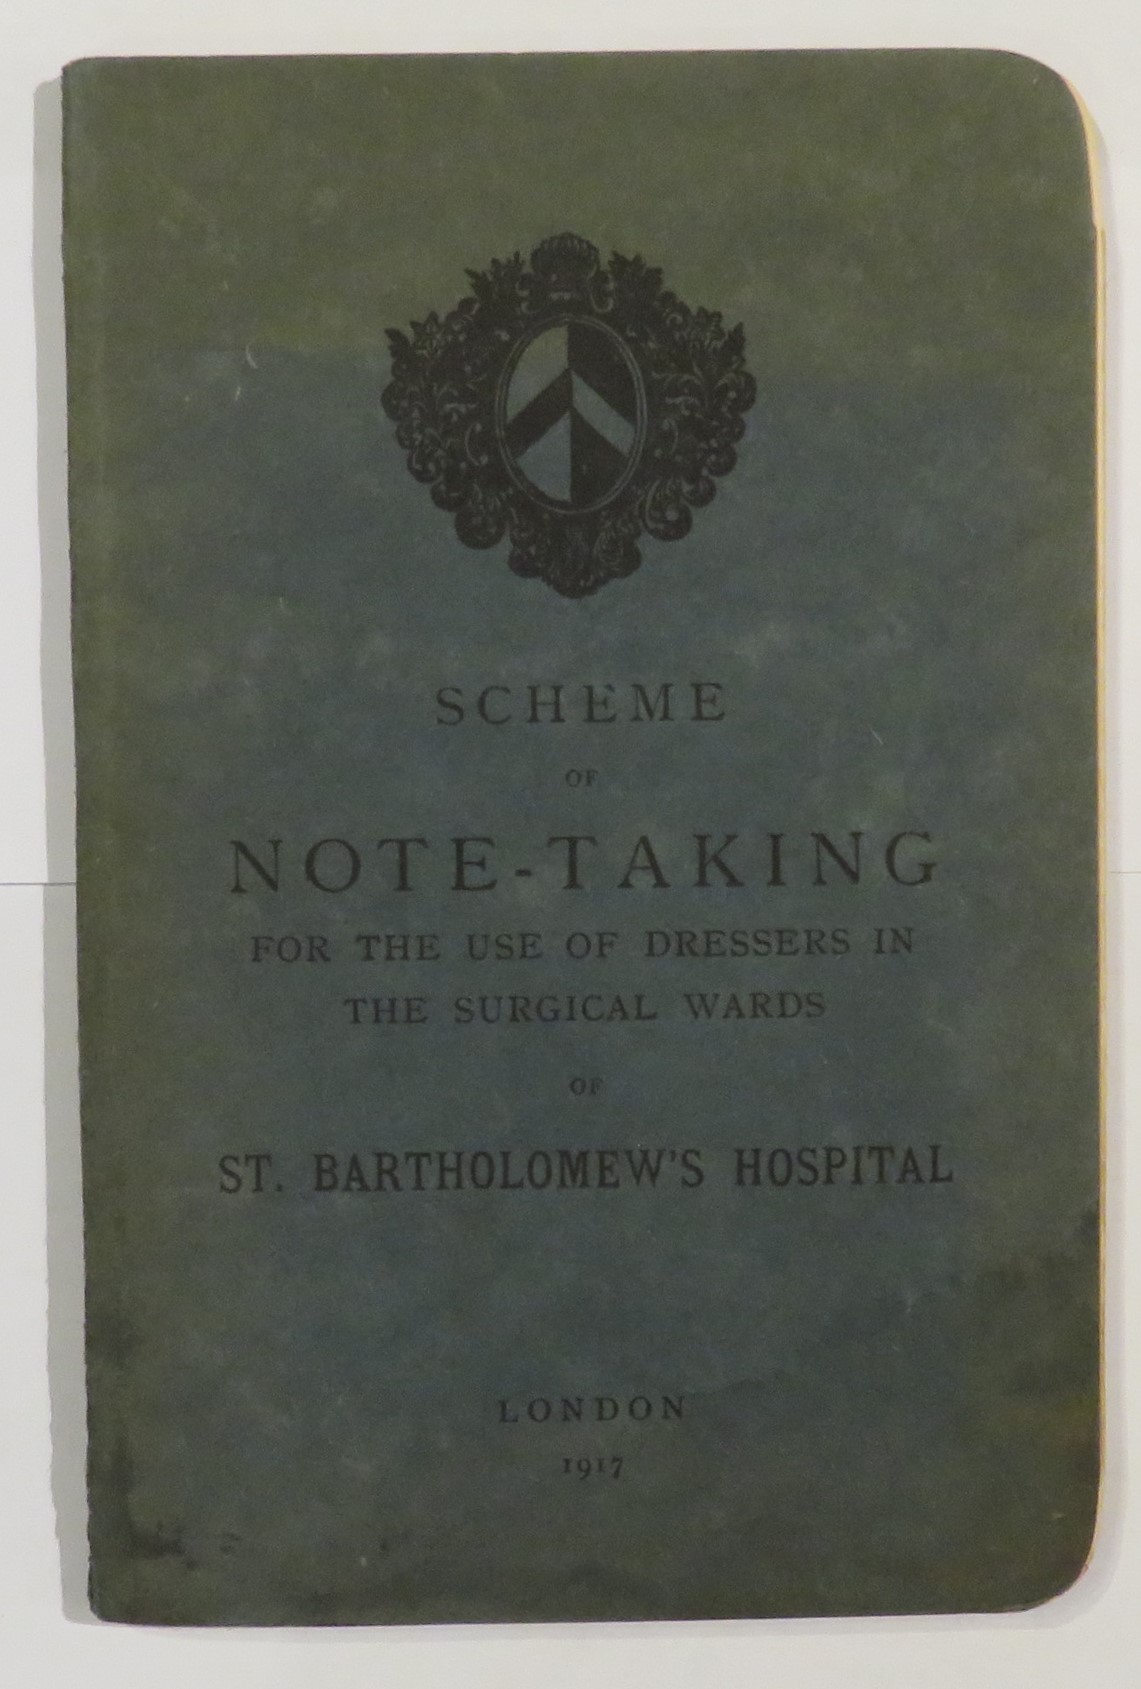 Scheme of Note-Taking for the use of Dressers in Surgical Wards